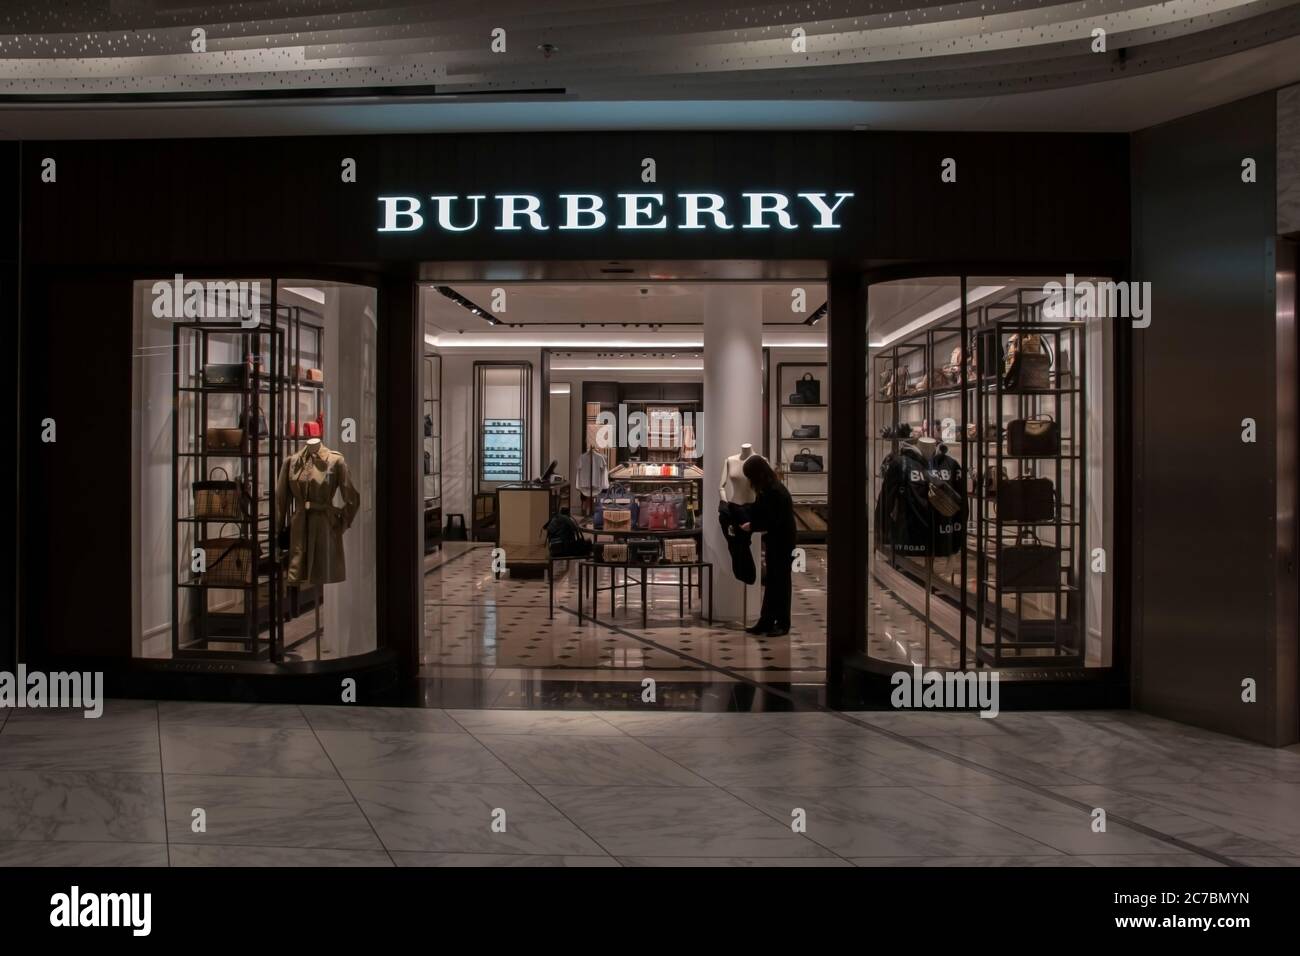 Burberry At Schiphol Behind The Gates At Amsterdam The Netherlands 7-12-2019 Stock Photo Alamy